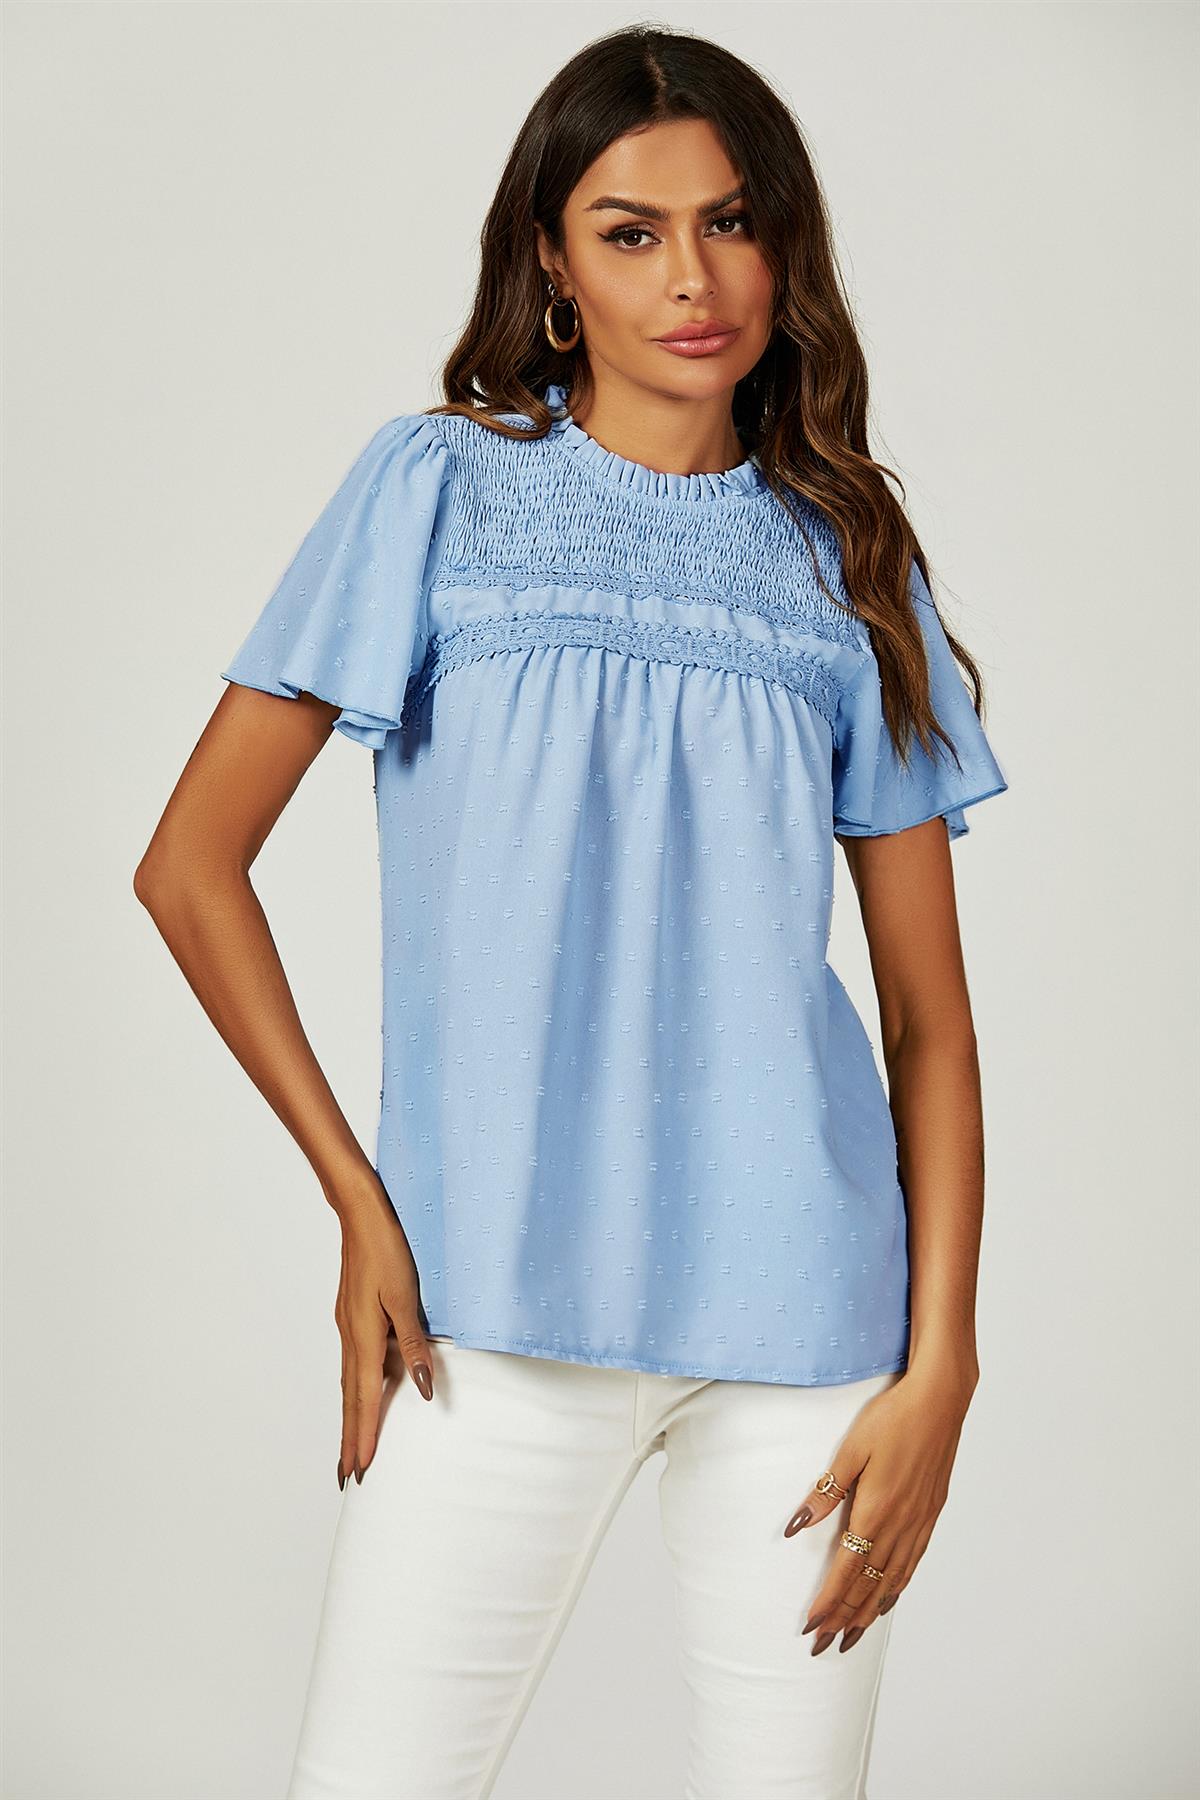 Lace Detail Short Sleeve Blouse Top In Blue FS646